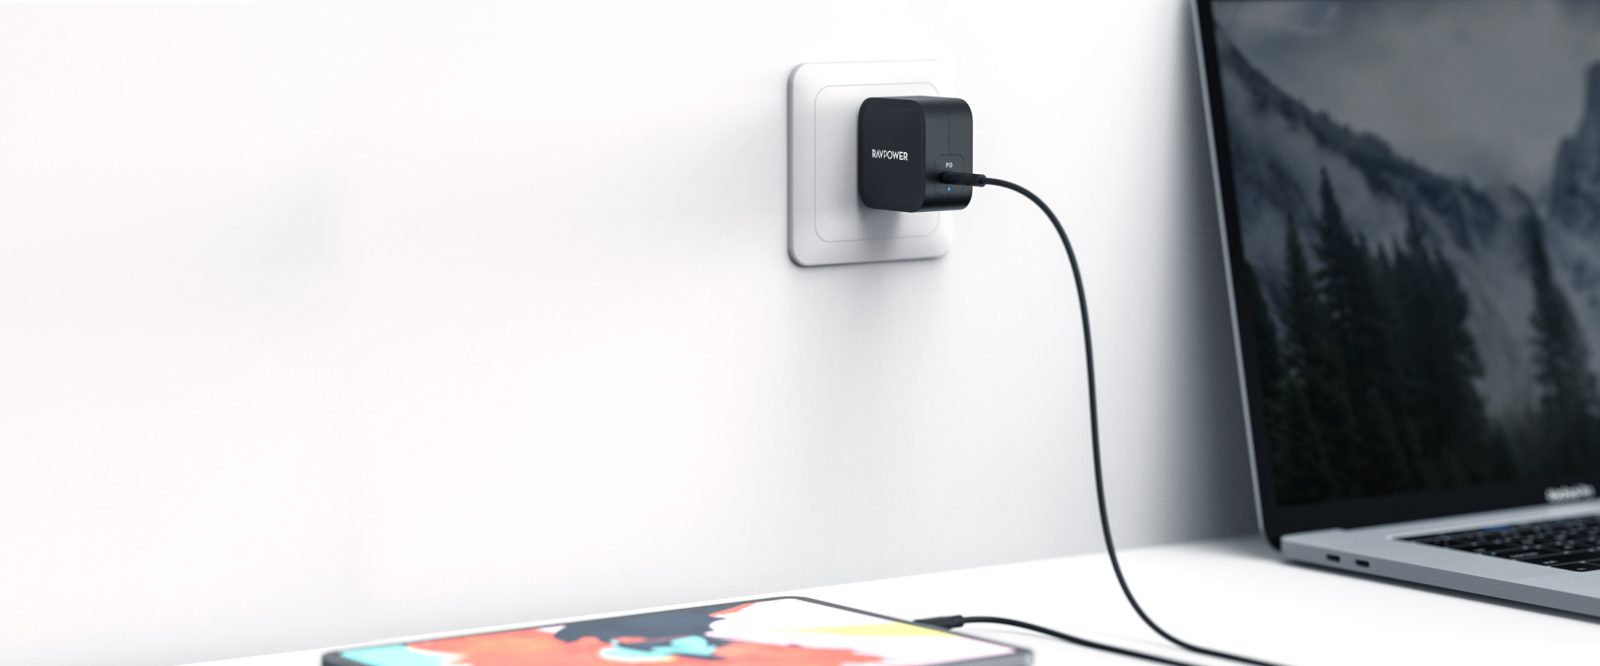 RAVPower launches the smallest 61W wall charger, half the size of Apple’s - 9to5Mac thumbnail